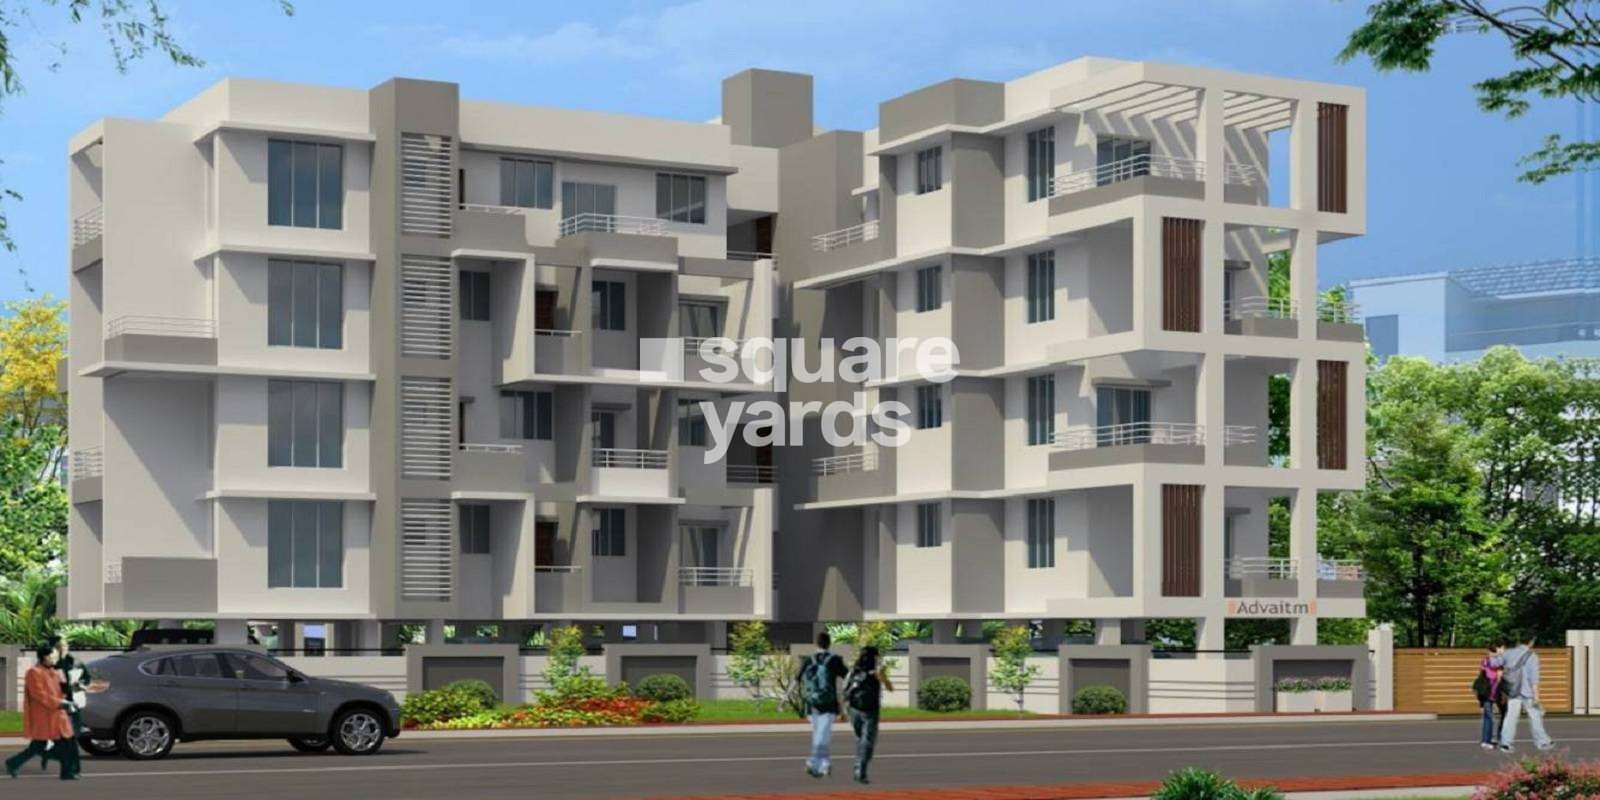 Atharva Advaitm Residency Cover Image